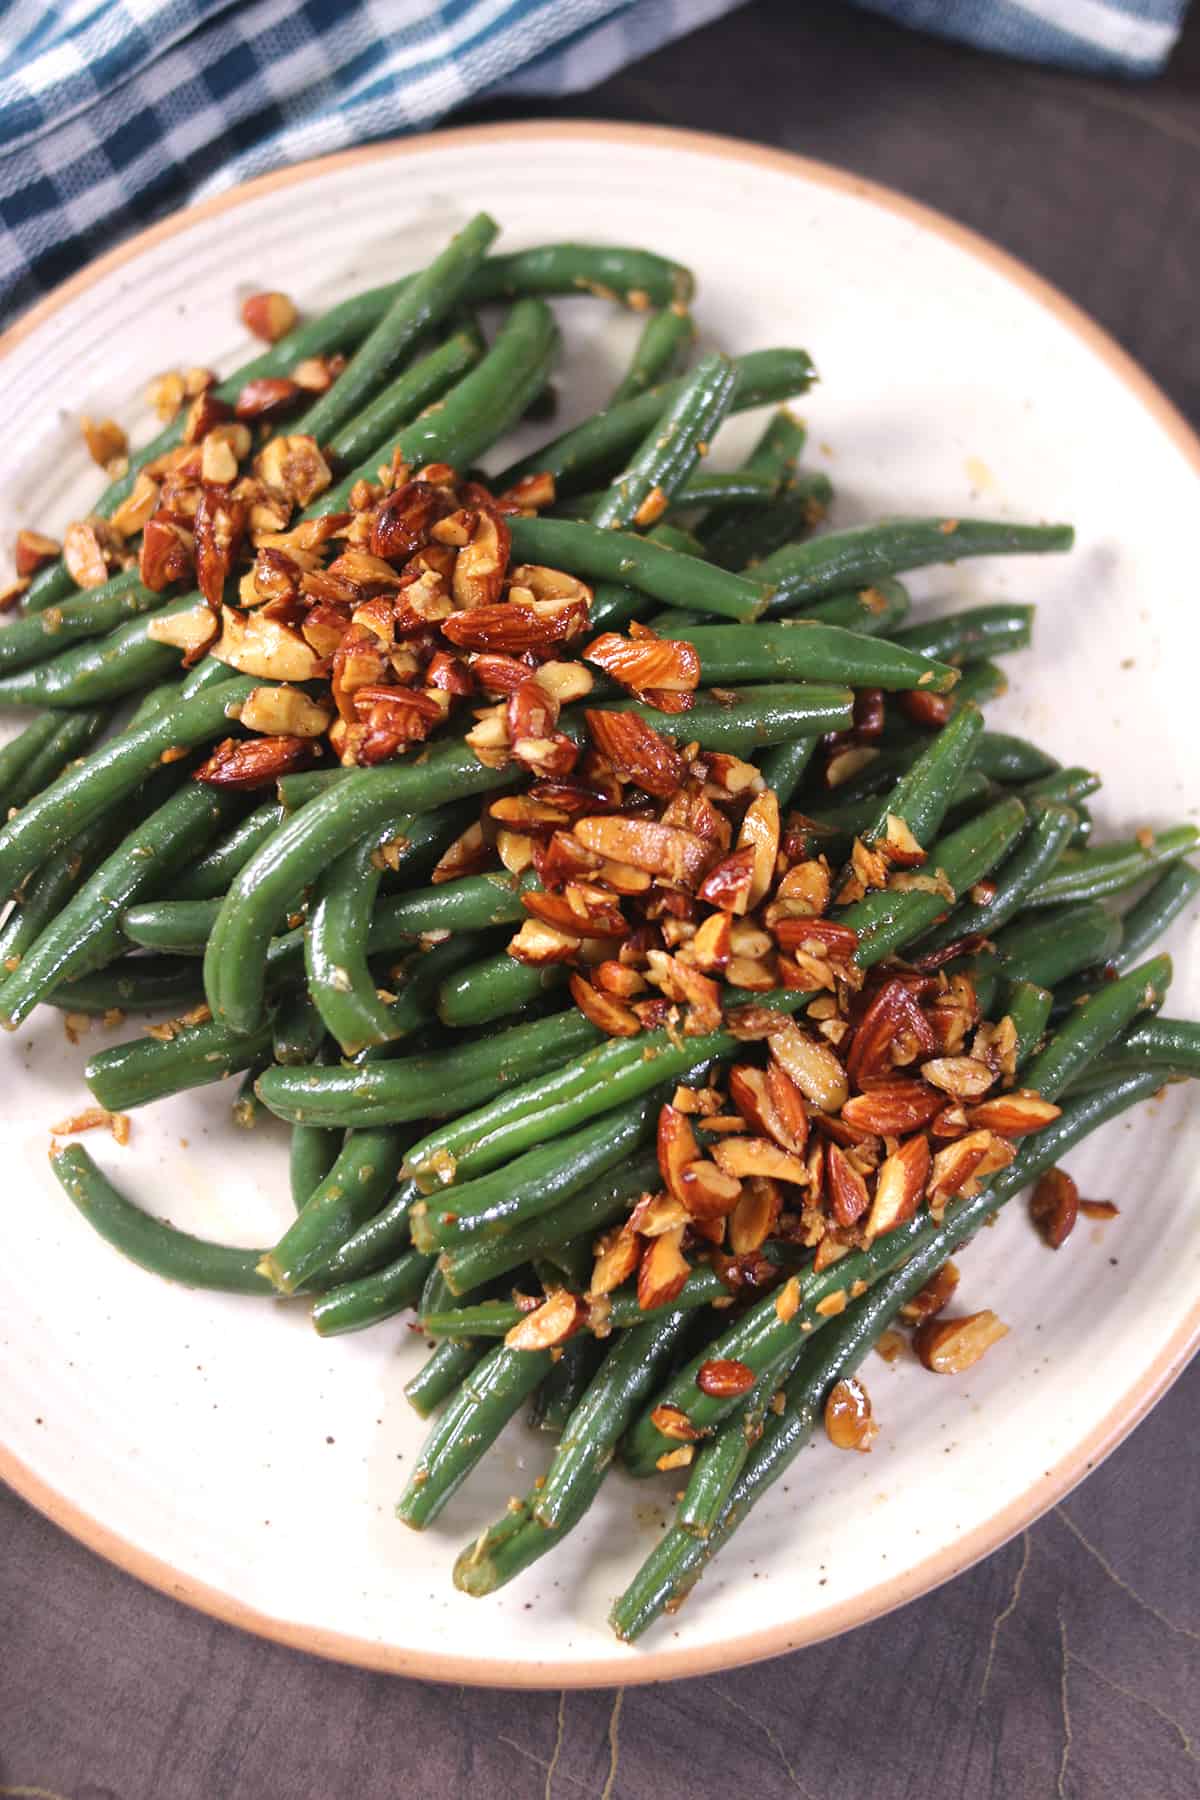 Classic french side dish for weeknight or holiday dinner - Green beans almondine.